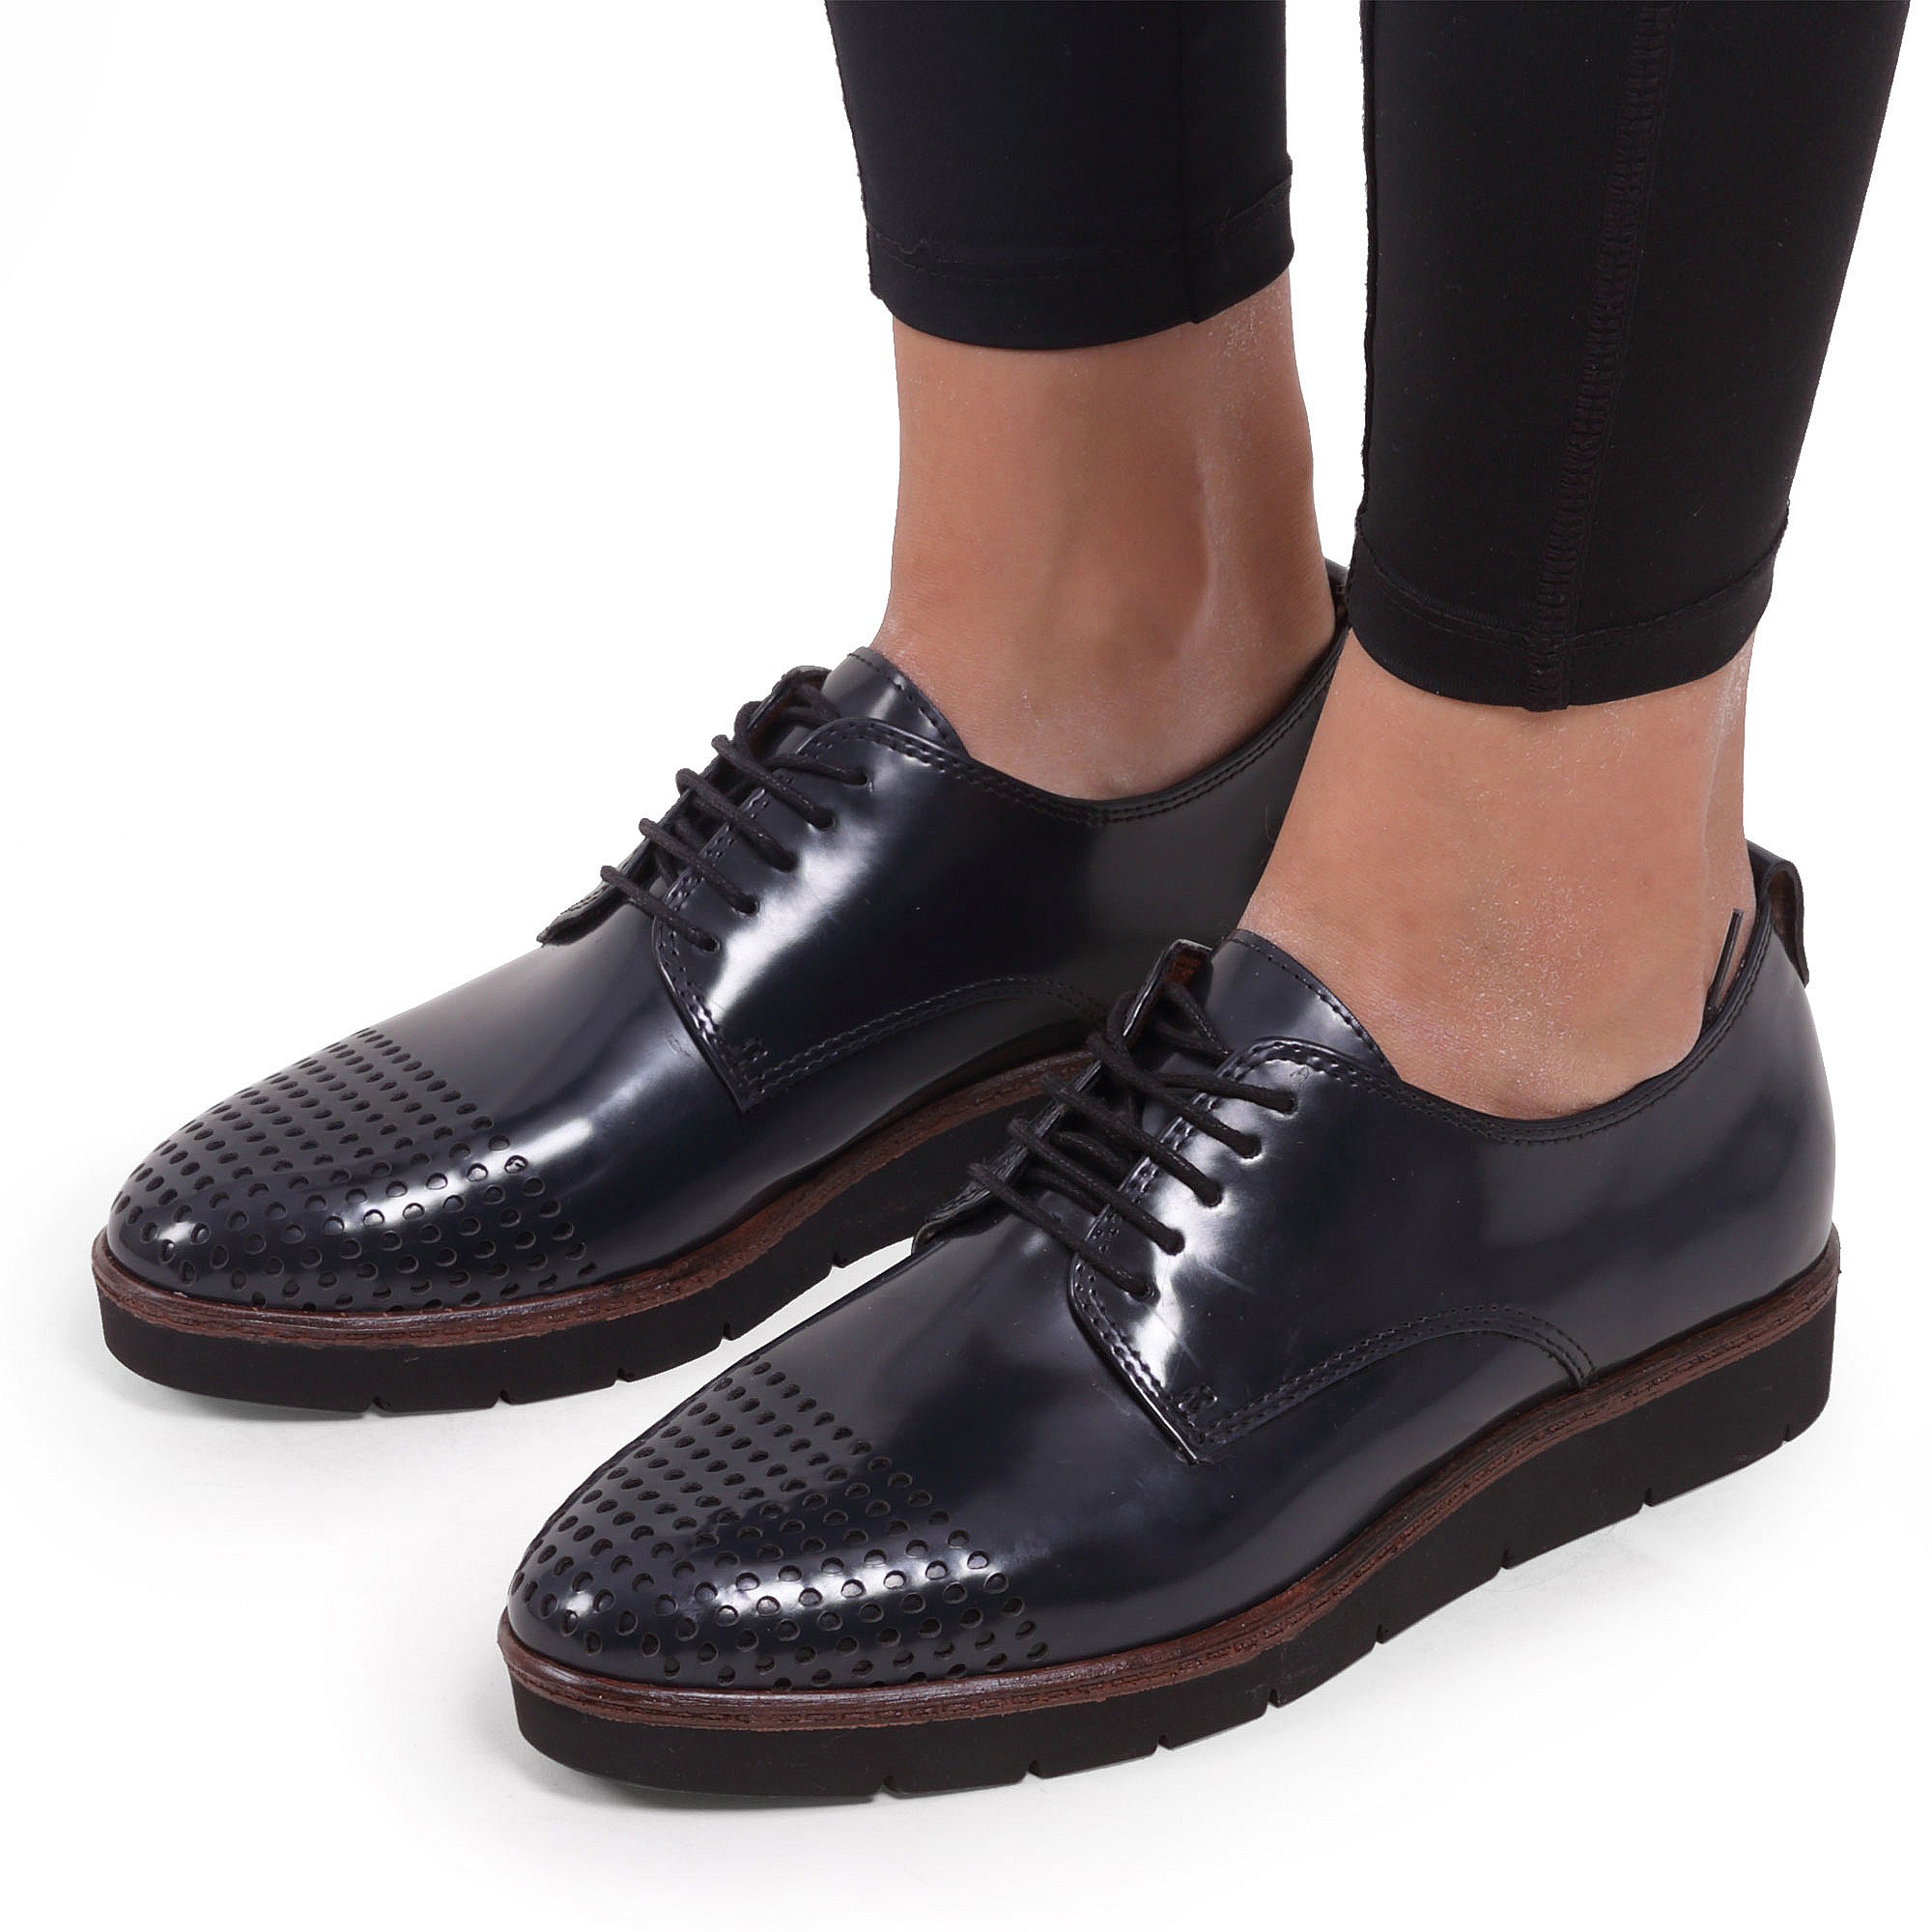 Tamaris Oxford Shoes Factory Sale, UP TO 70% OFF |